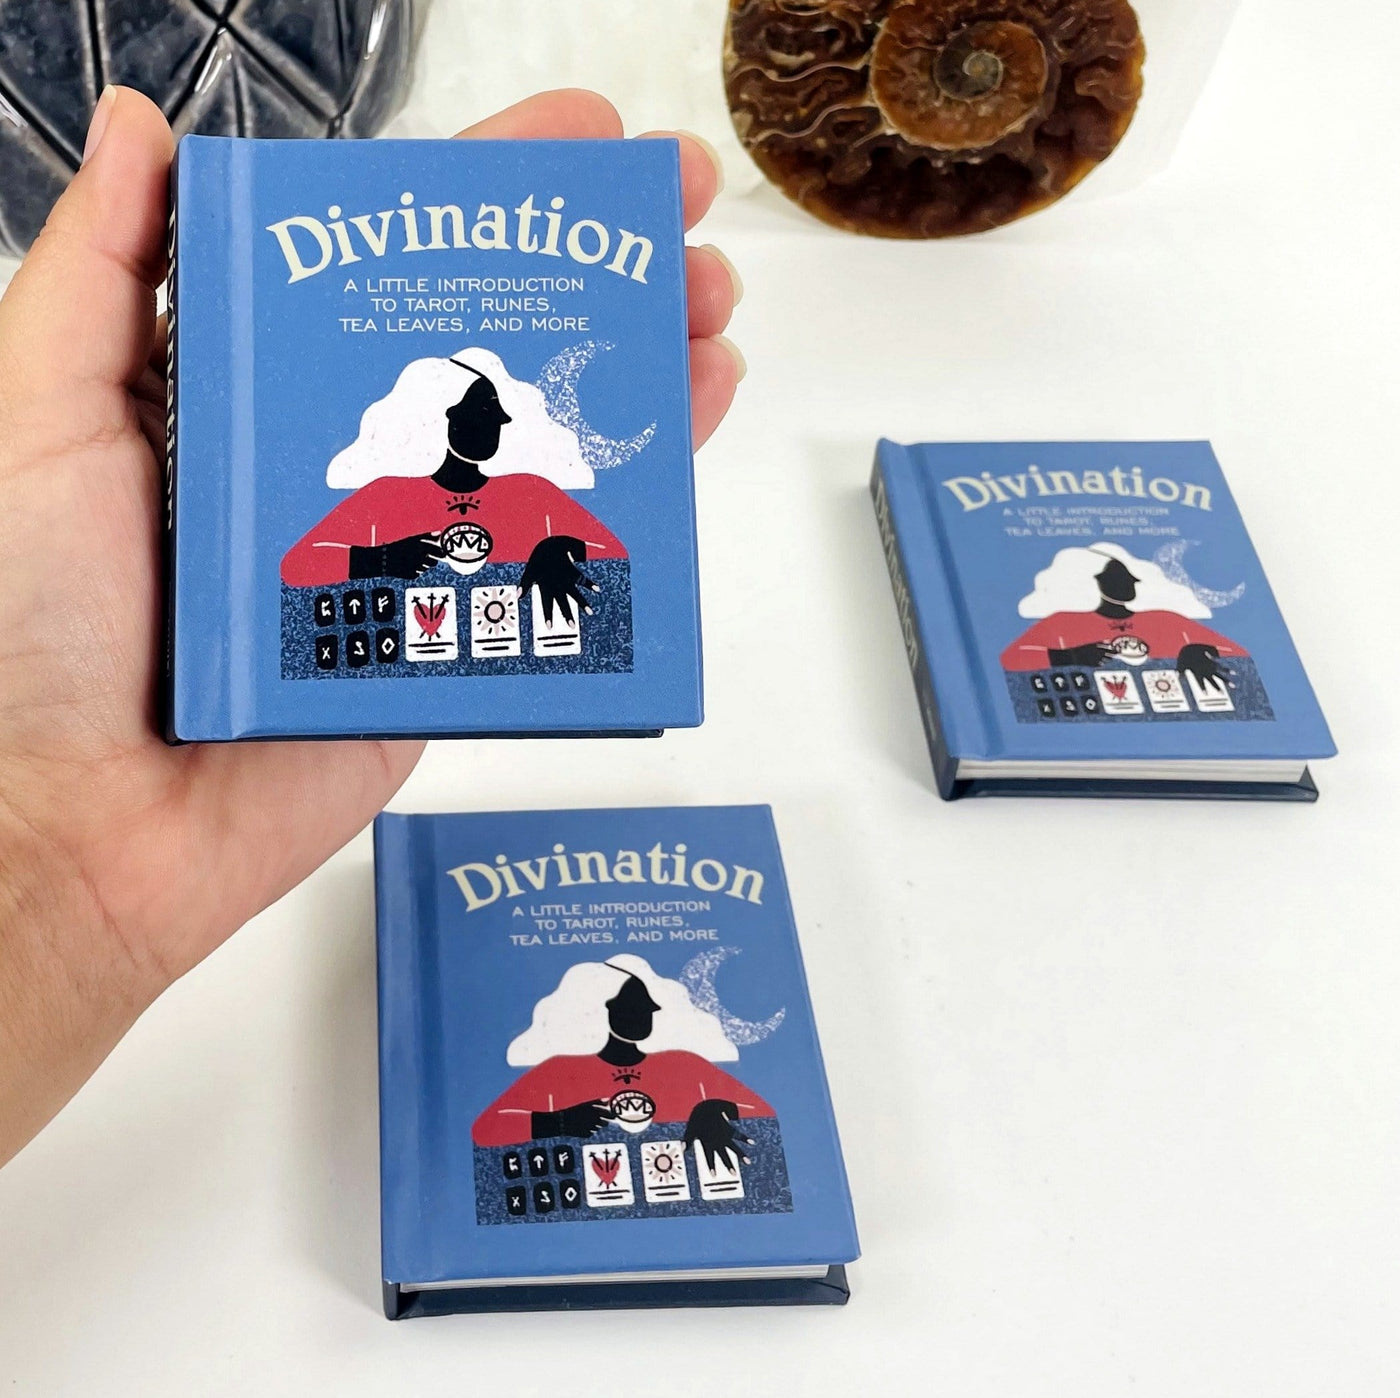 Divination Mini Guidance Book in Hand and 2 more lying Down on White Background.